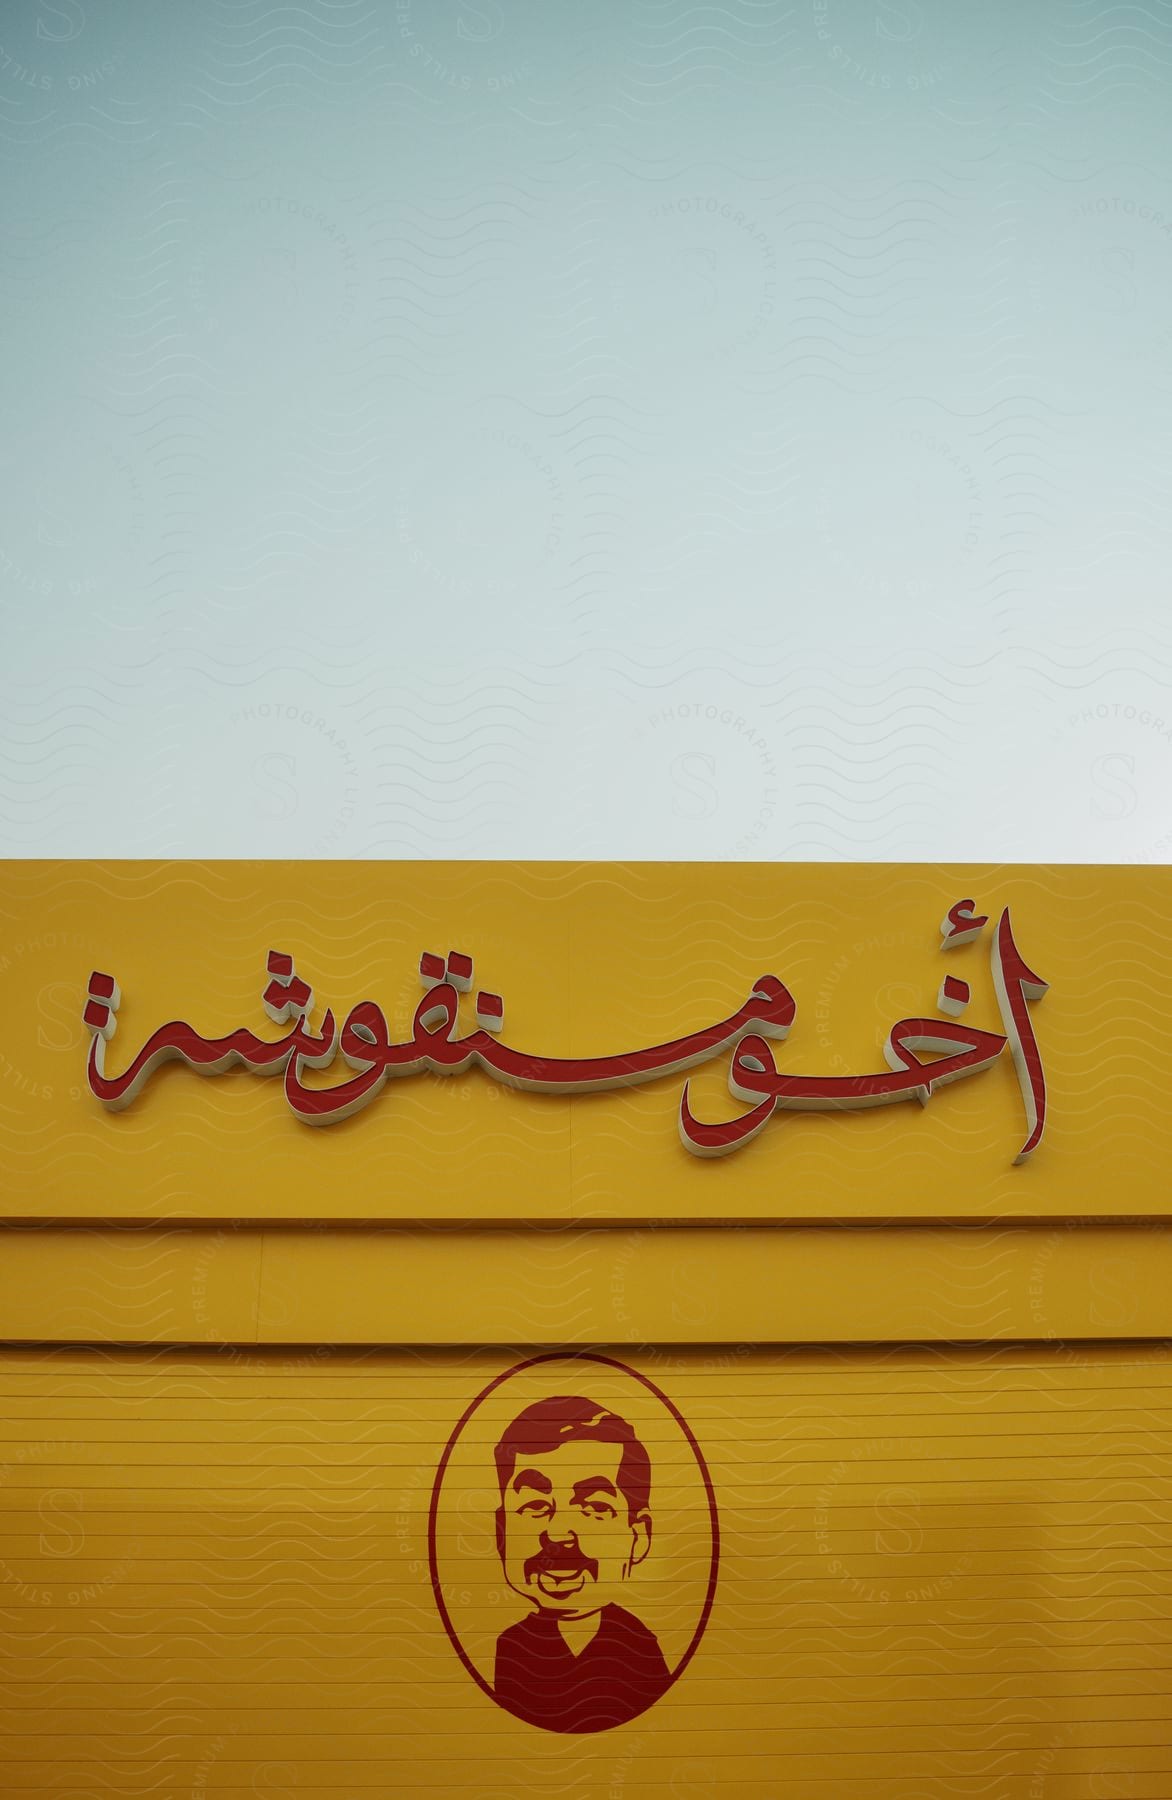 A sign featuring a man's smiling face adorns the front of a fast food restaurant